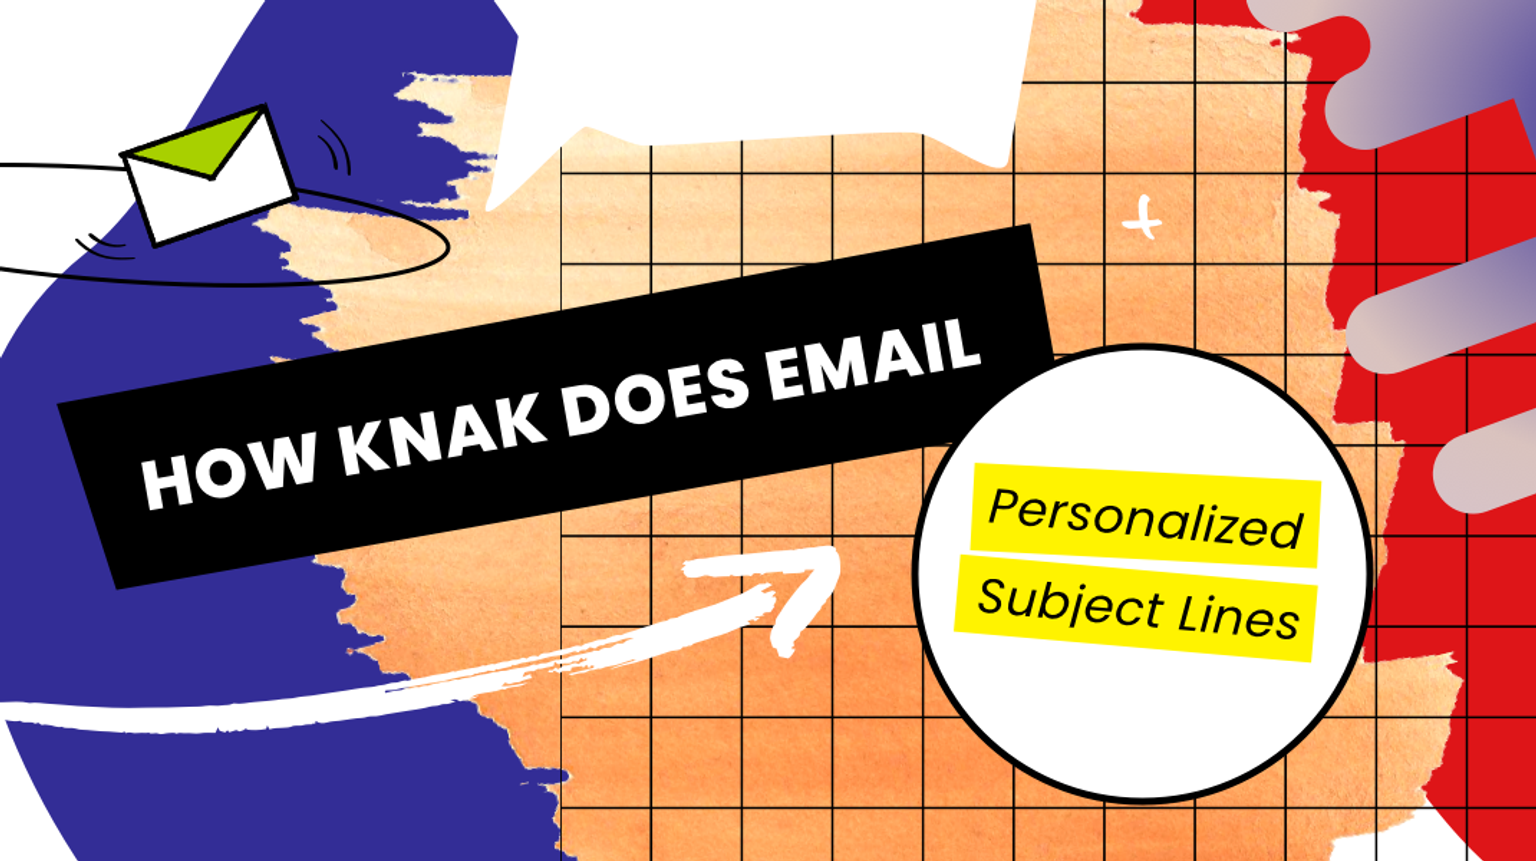 How Knak Does Email: Personalized Subject Lines